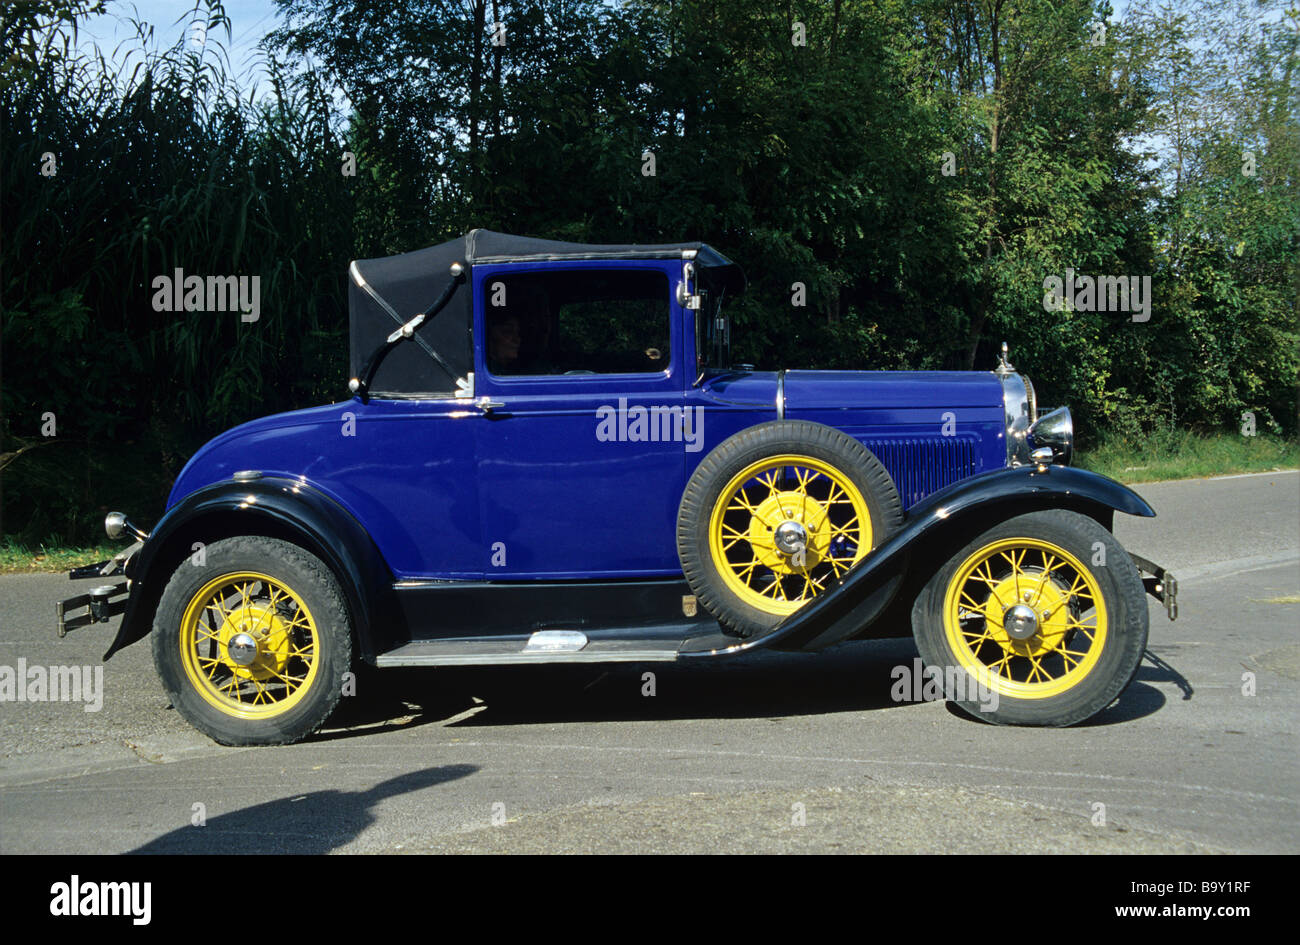 Blue Ford Model A Vintage or Veteran Car or Automobile (1930) Stock Photo